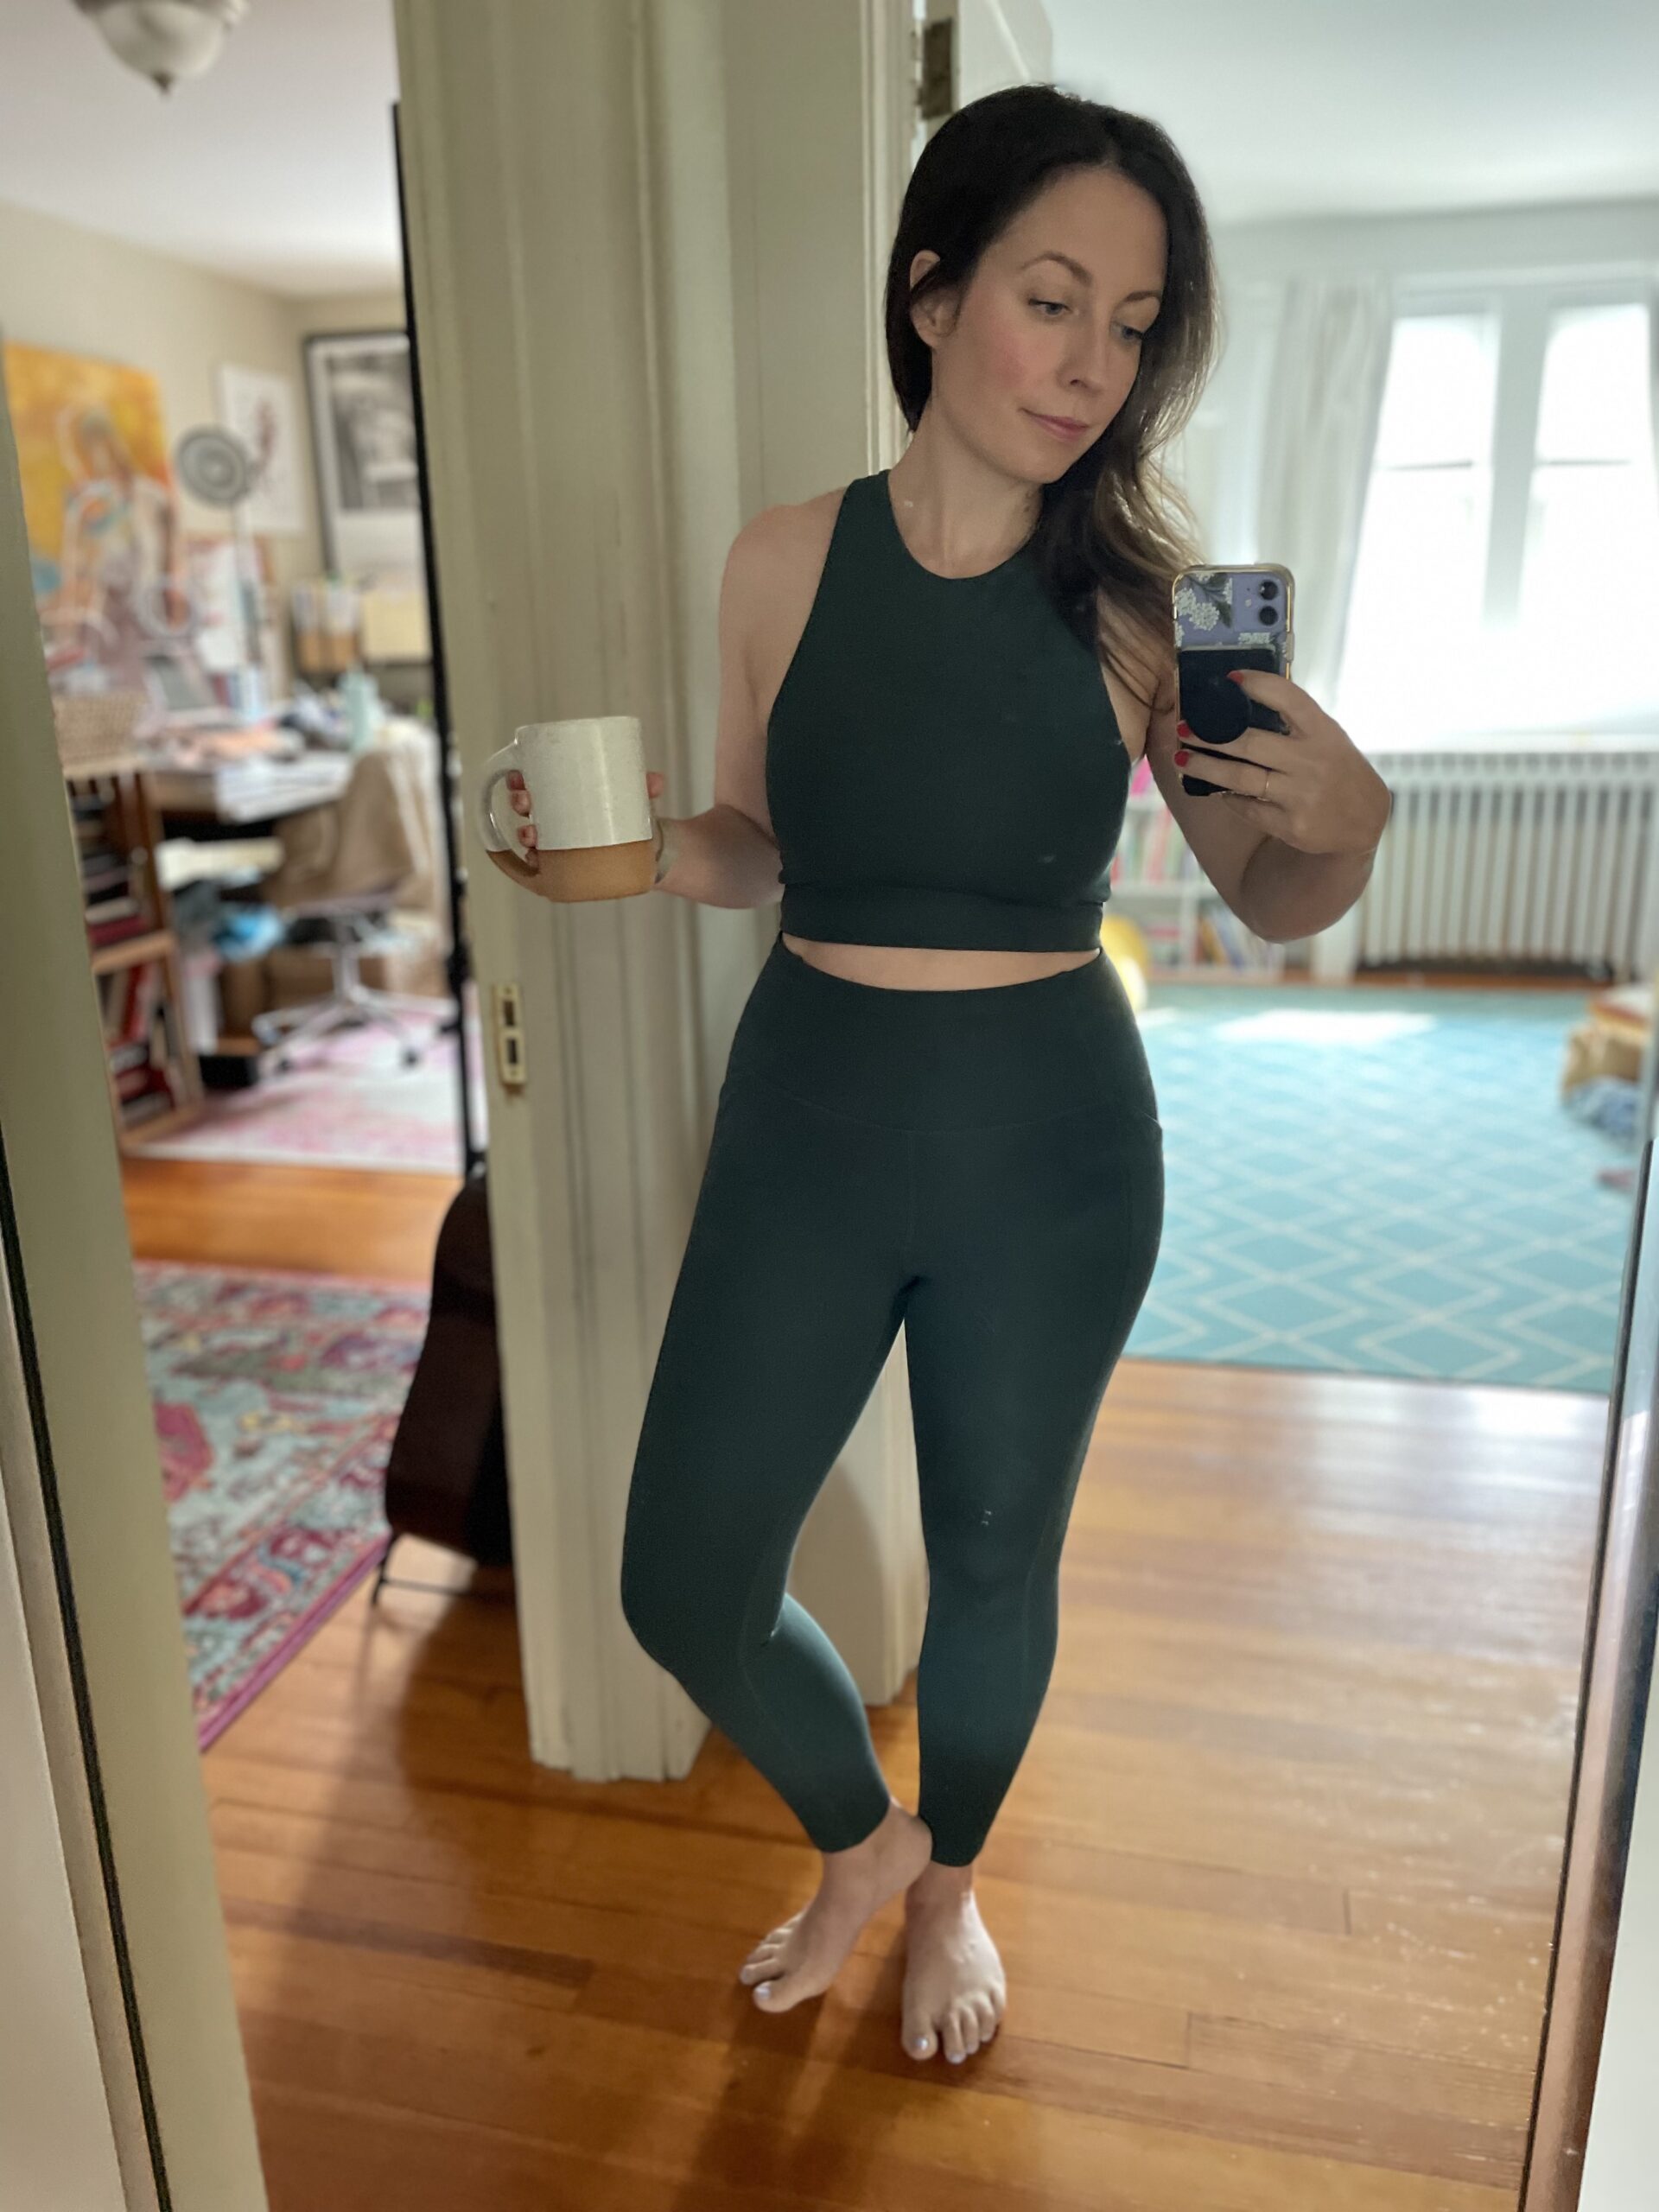 A woman takes a photo of herself wearing a sports bra and leggings in a full length mirror.